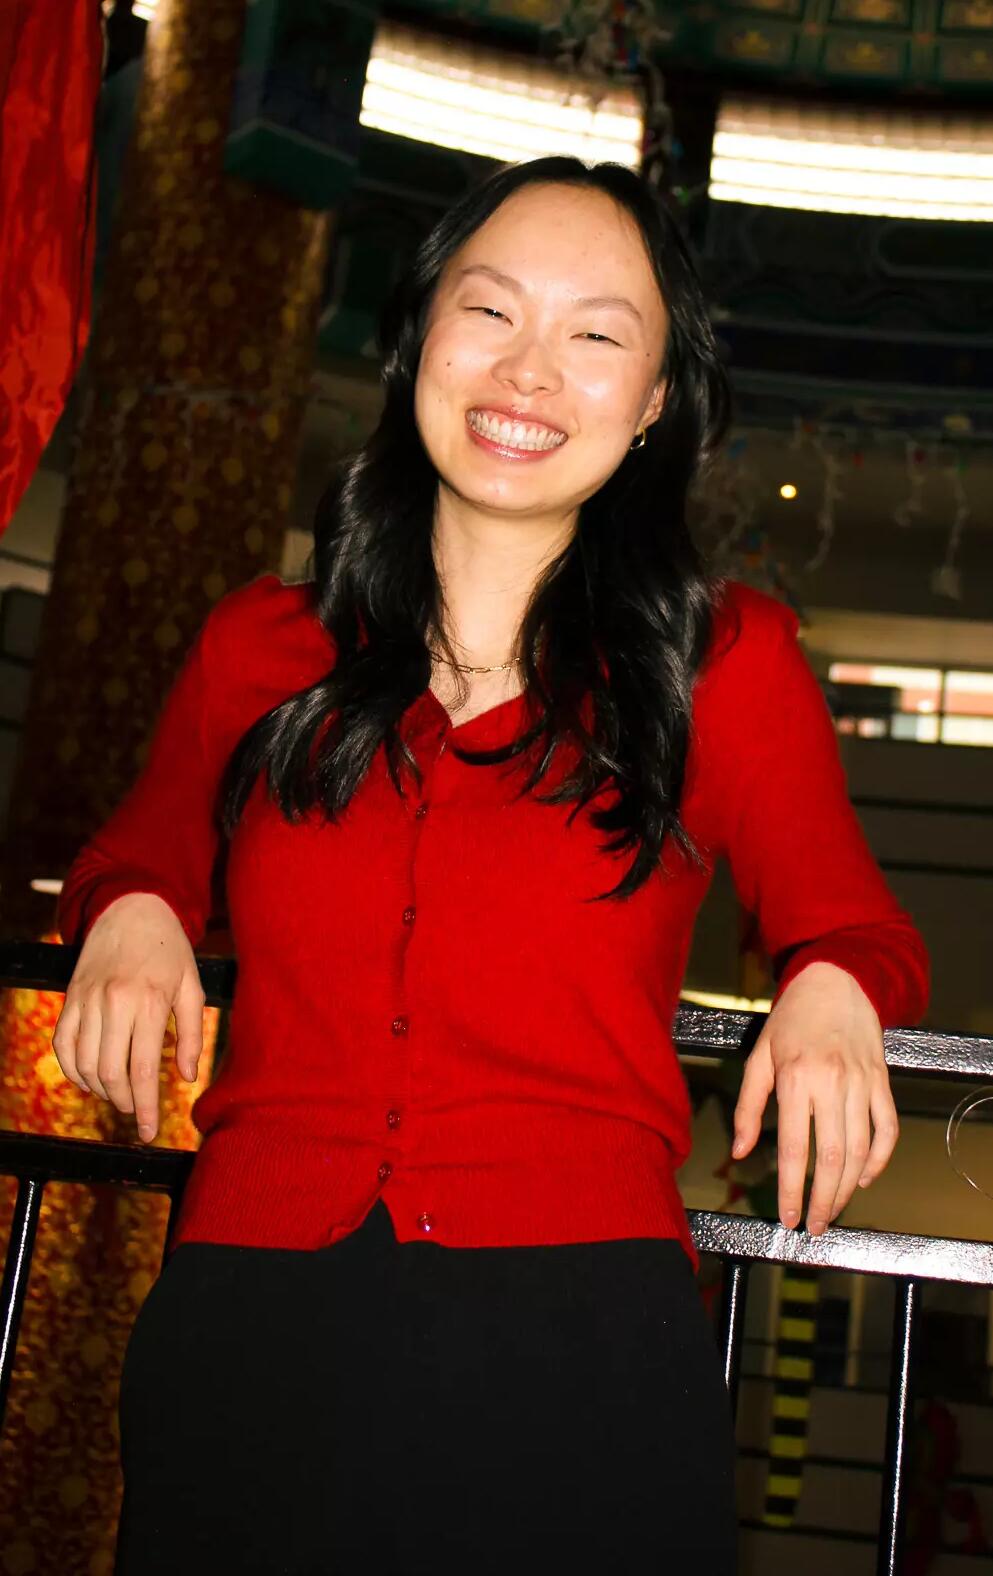 A woman in a red shirt smiles at the camera